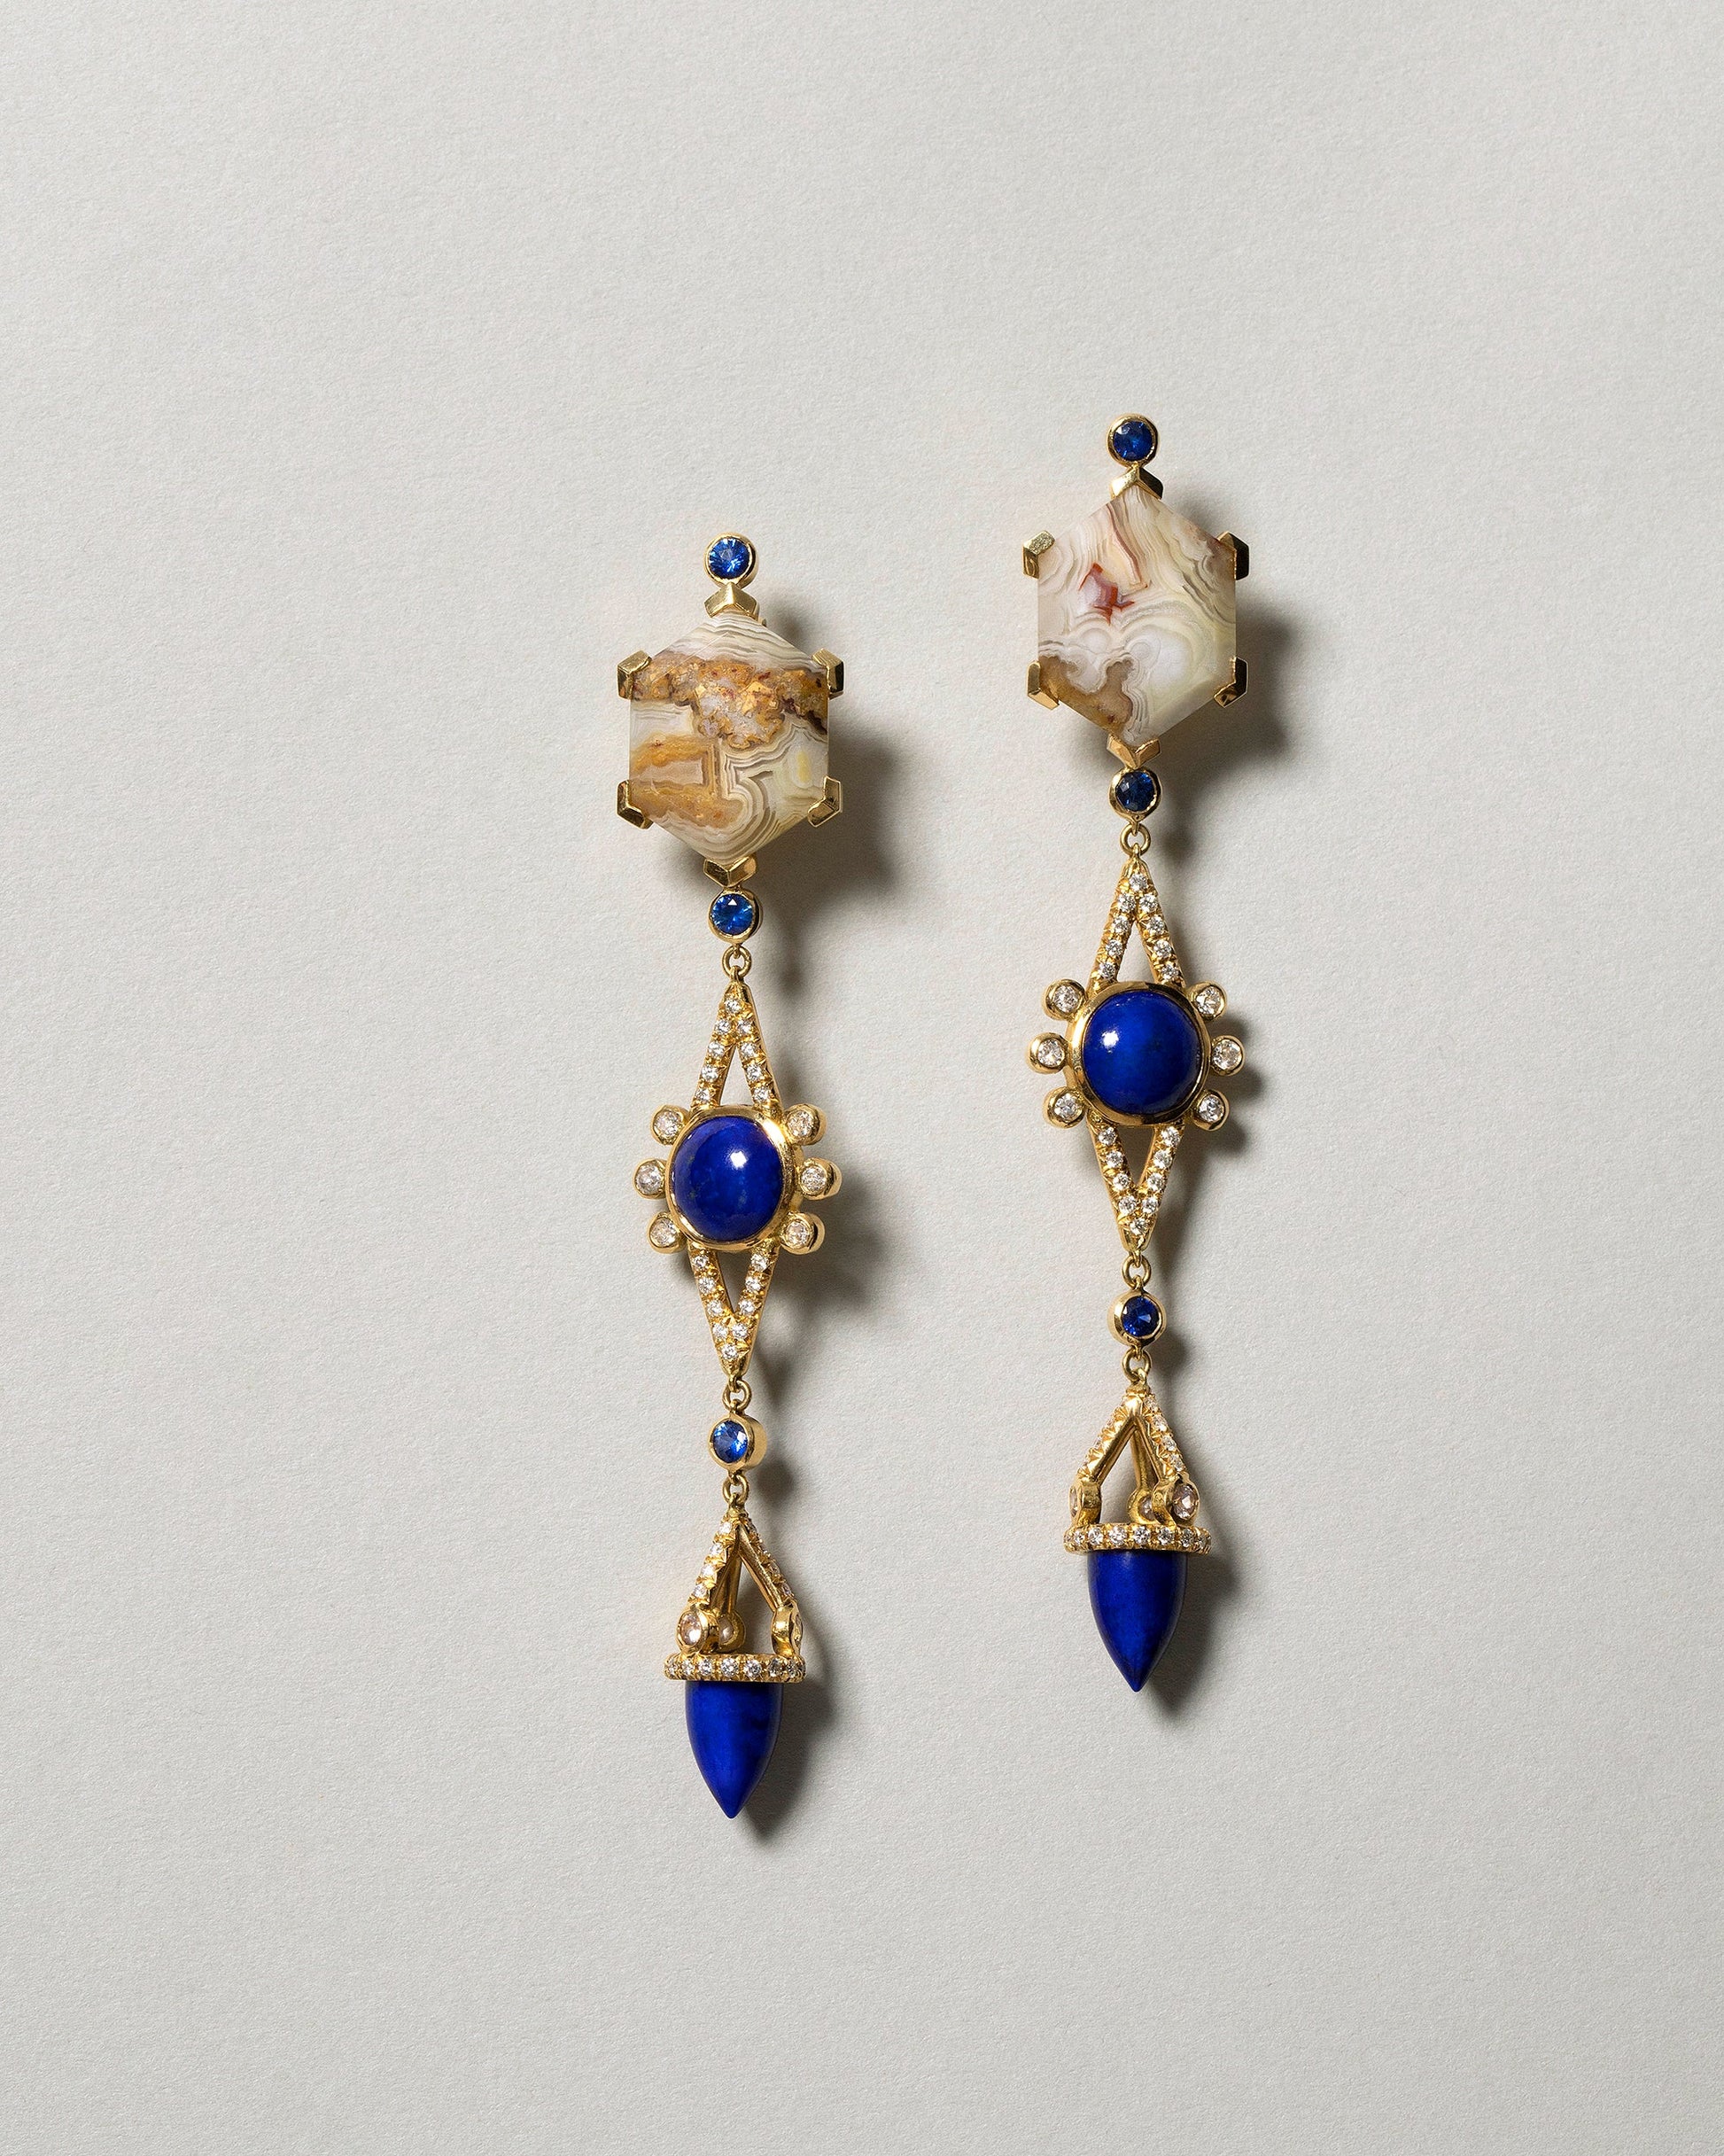  Agate & Lapis Drop Earrings on light color background.